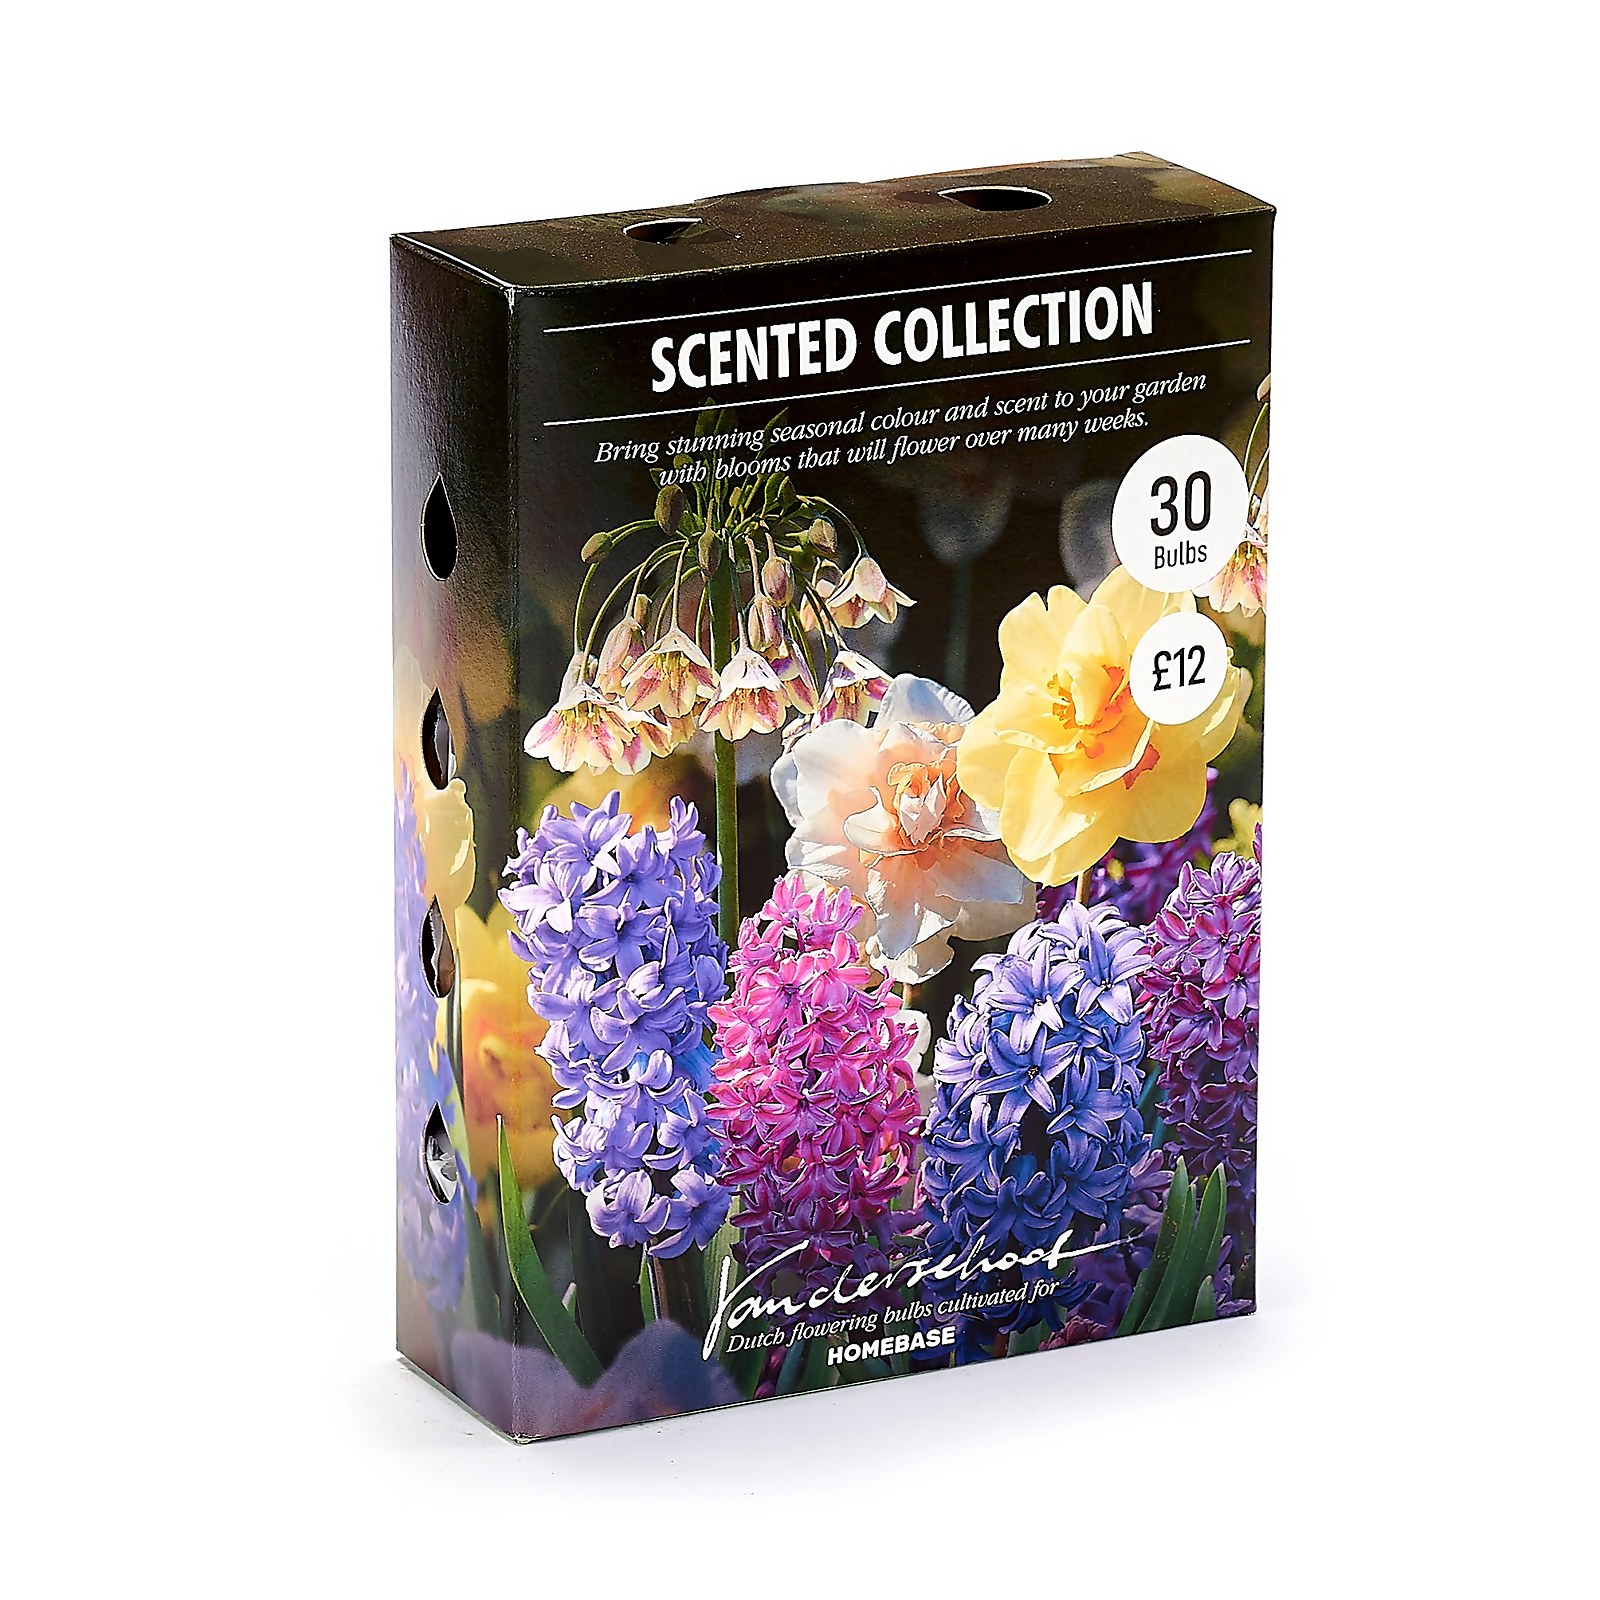 Photo of Scented Collection Garden Bulbs